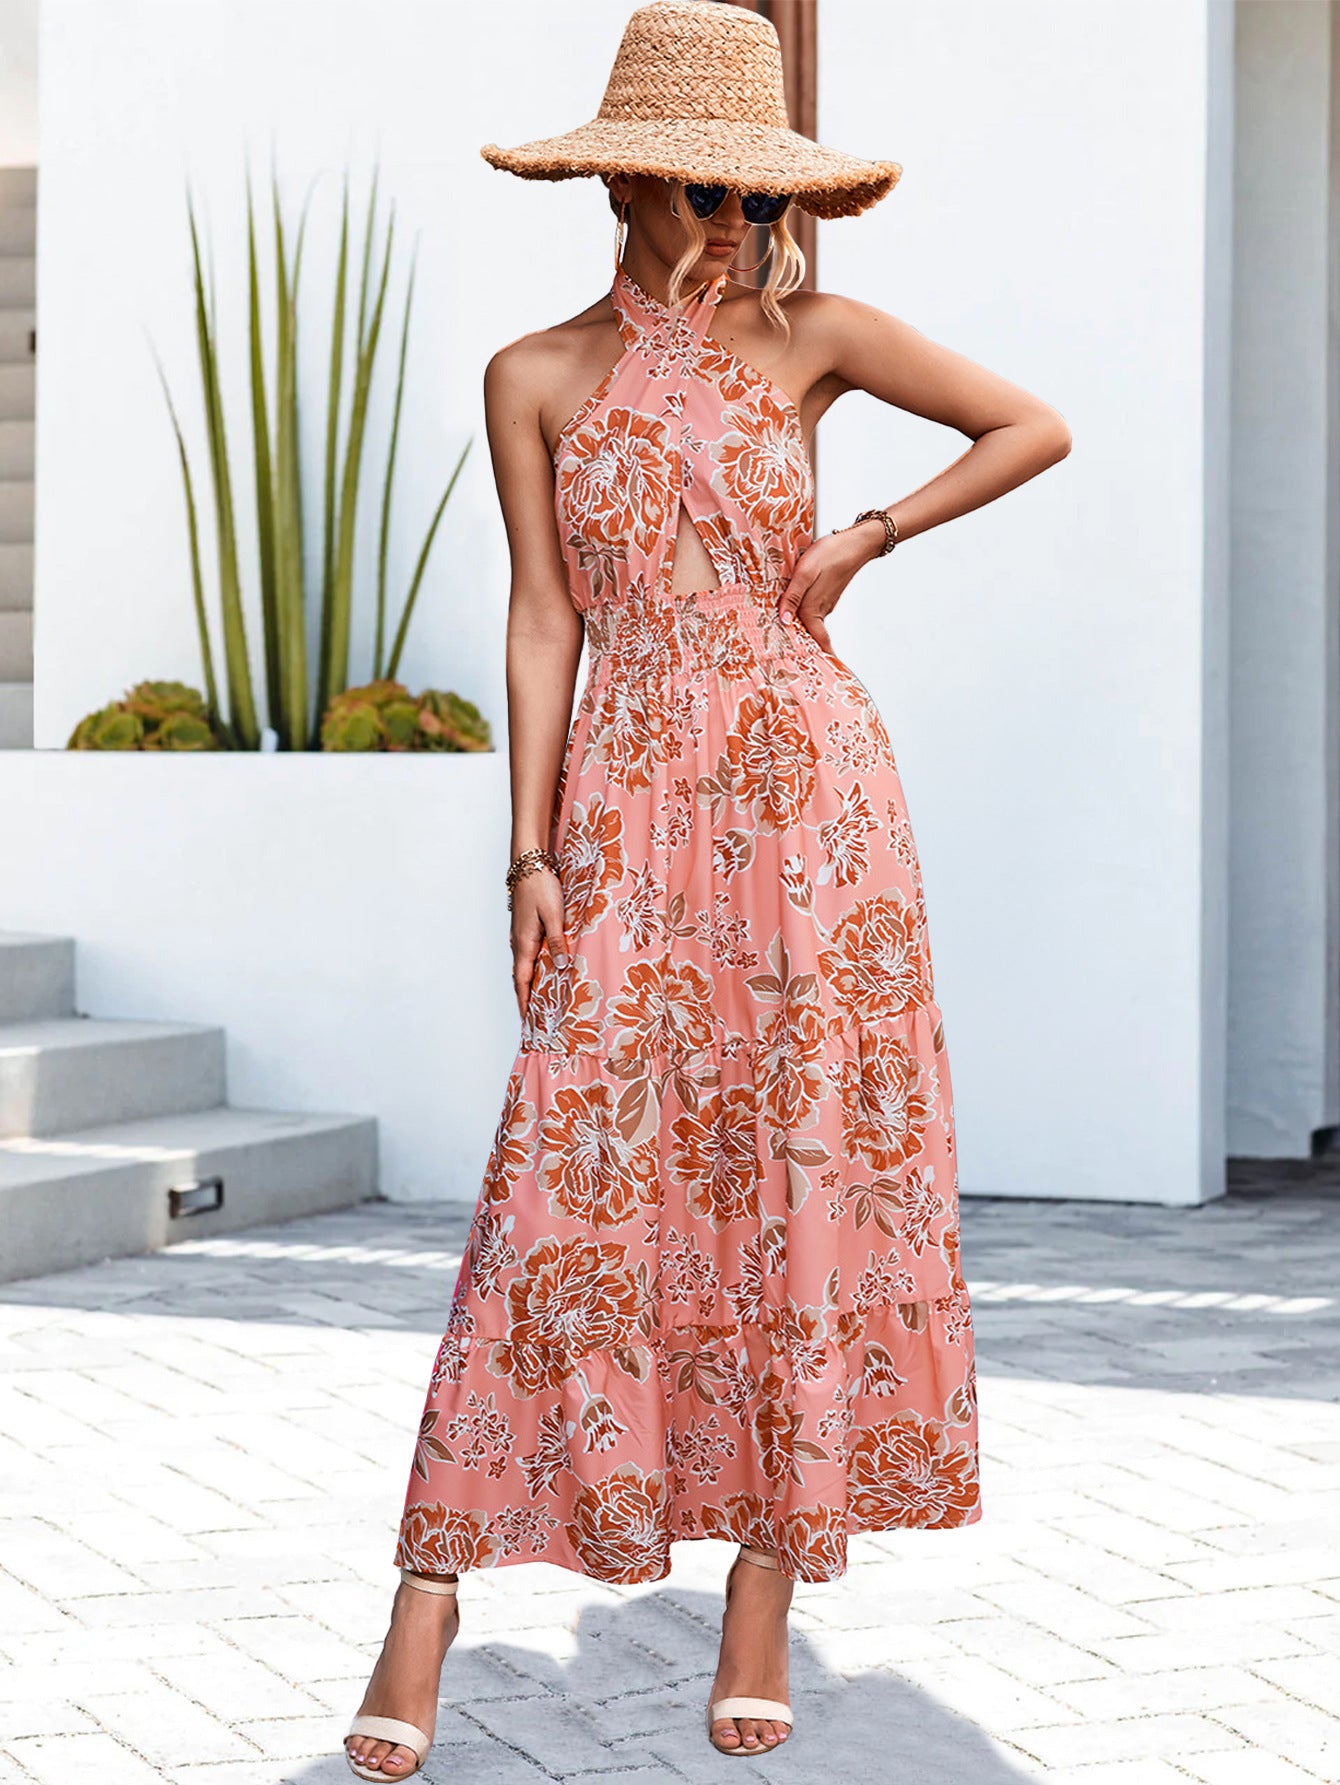 Charming Classy Sexy Backless Halter Printing Dresses